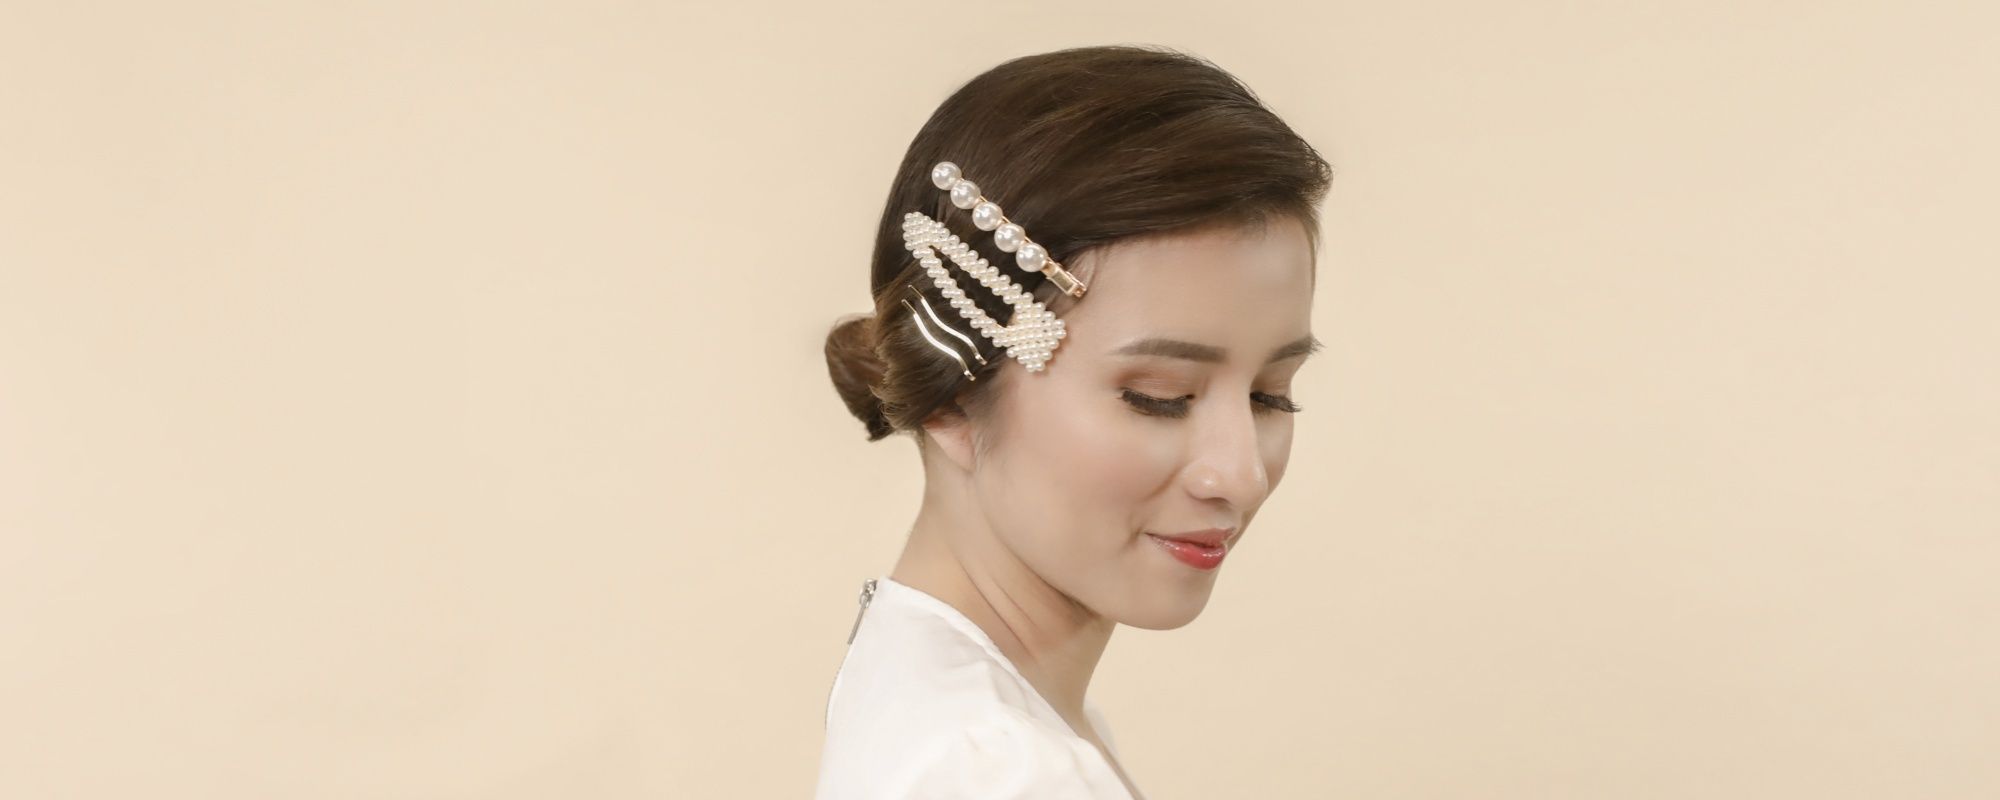 Hair Clips for Women: 30 Looks to Try Now